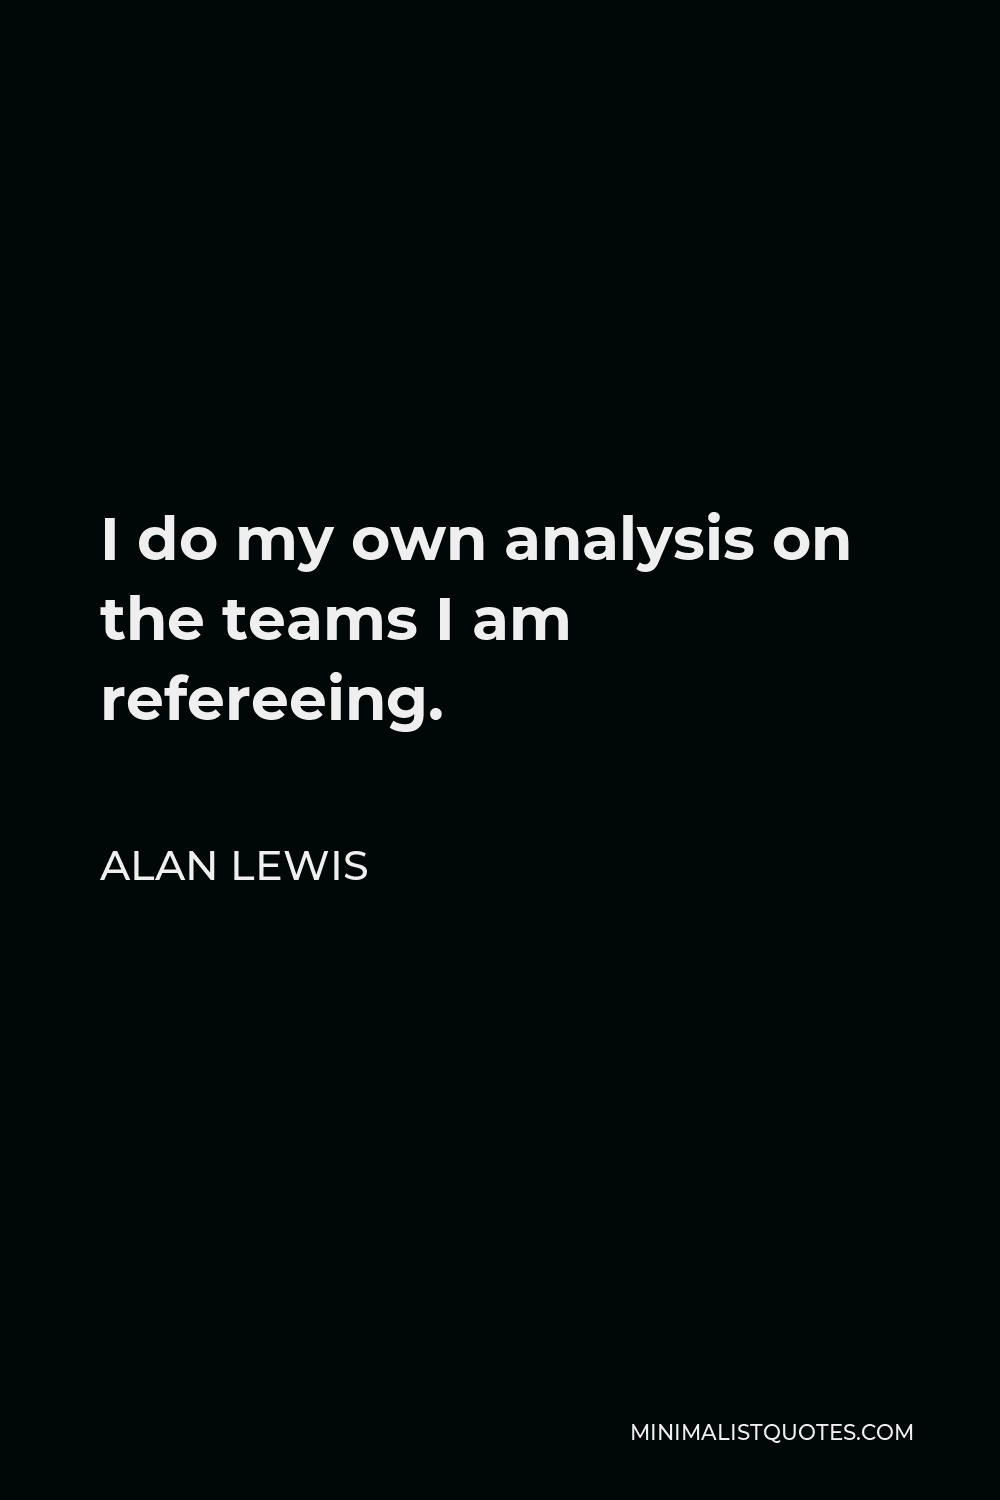 Alan Lewis Quote - I do my own analysis on the teams I am refereeing.